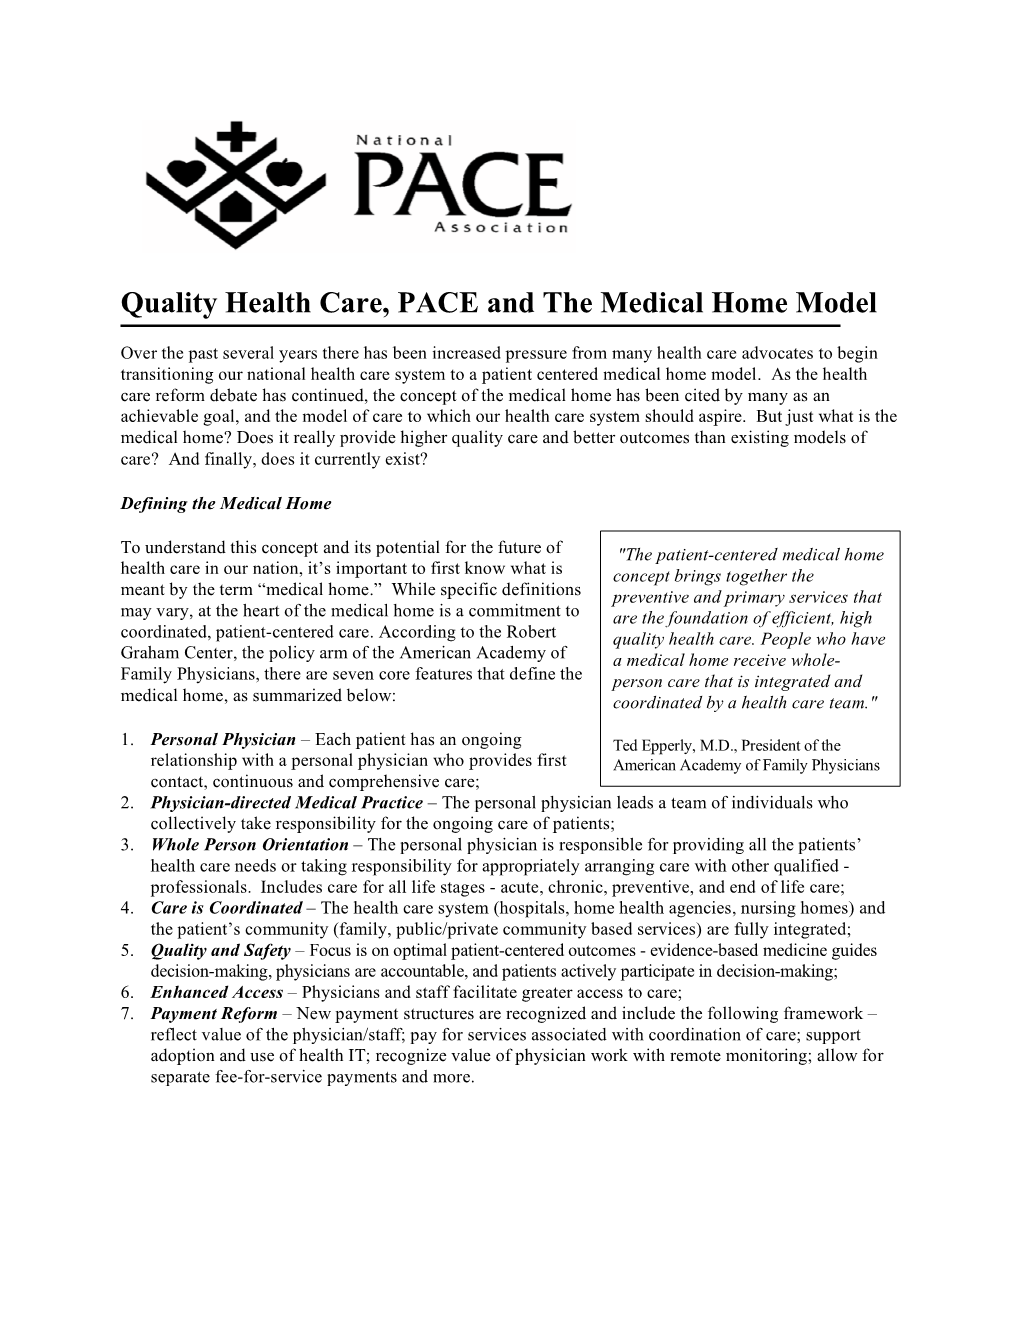 Quality Health Care, PACE and the Medical Home Model